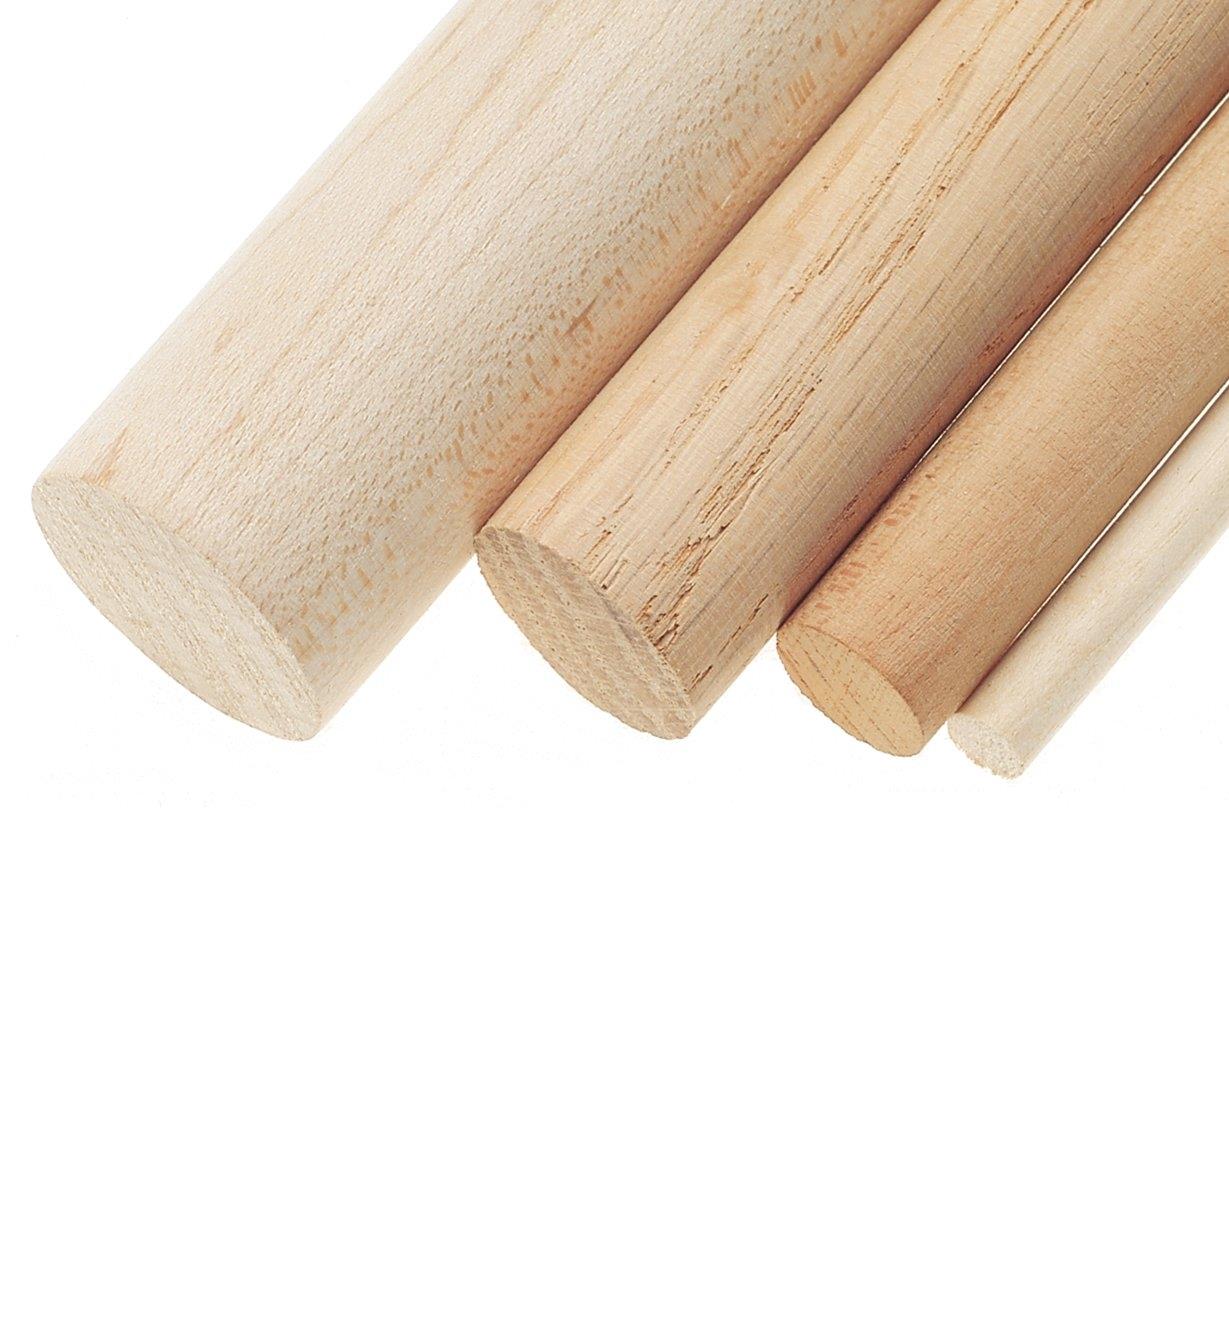 Close-up of Dowel Rod ends